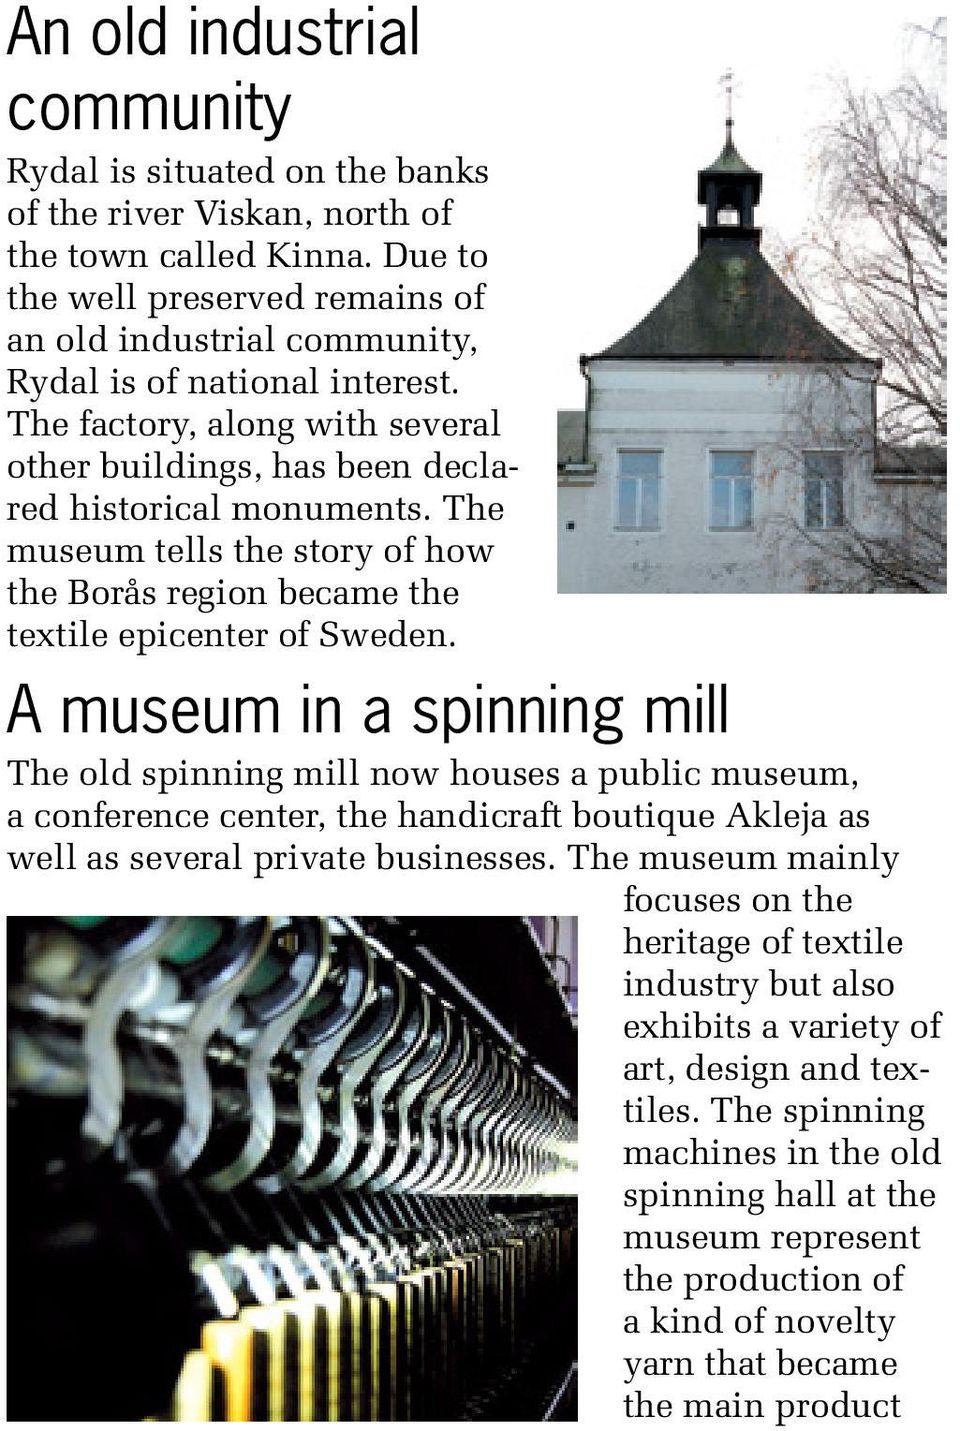 The museum tells the story of how the Borås region became the textile epicenter of Sweden.